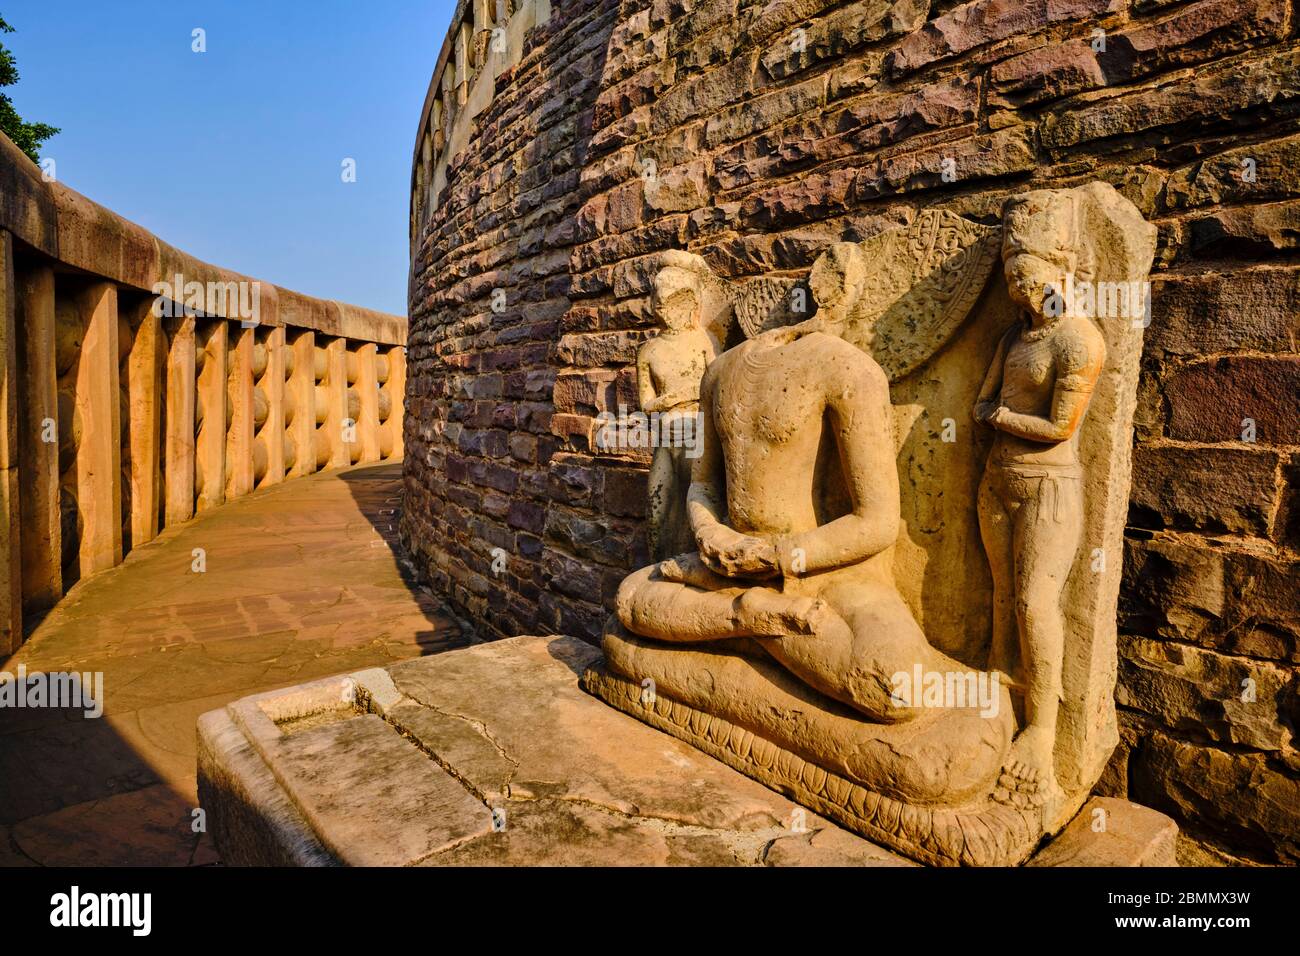 India, Madhya Pradesh state, Sanchi, Buddhist monuments listed as World Heritage by UNESCO, the main stupa a 2200 year old Buddhist monument built by Stock Photo